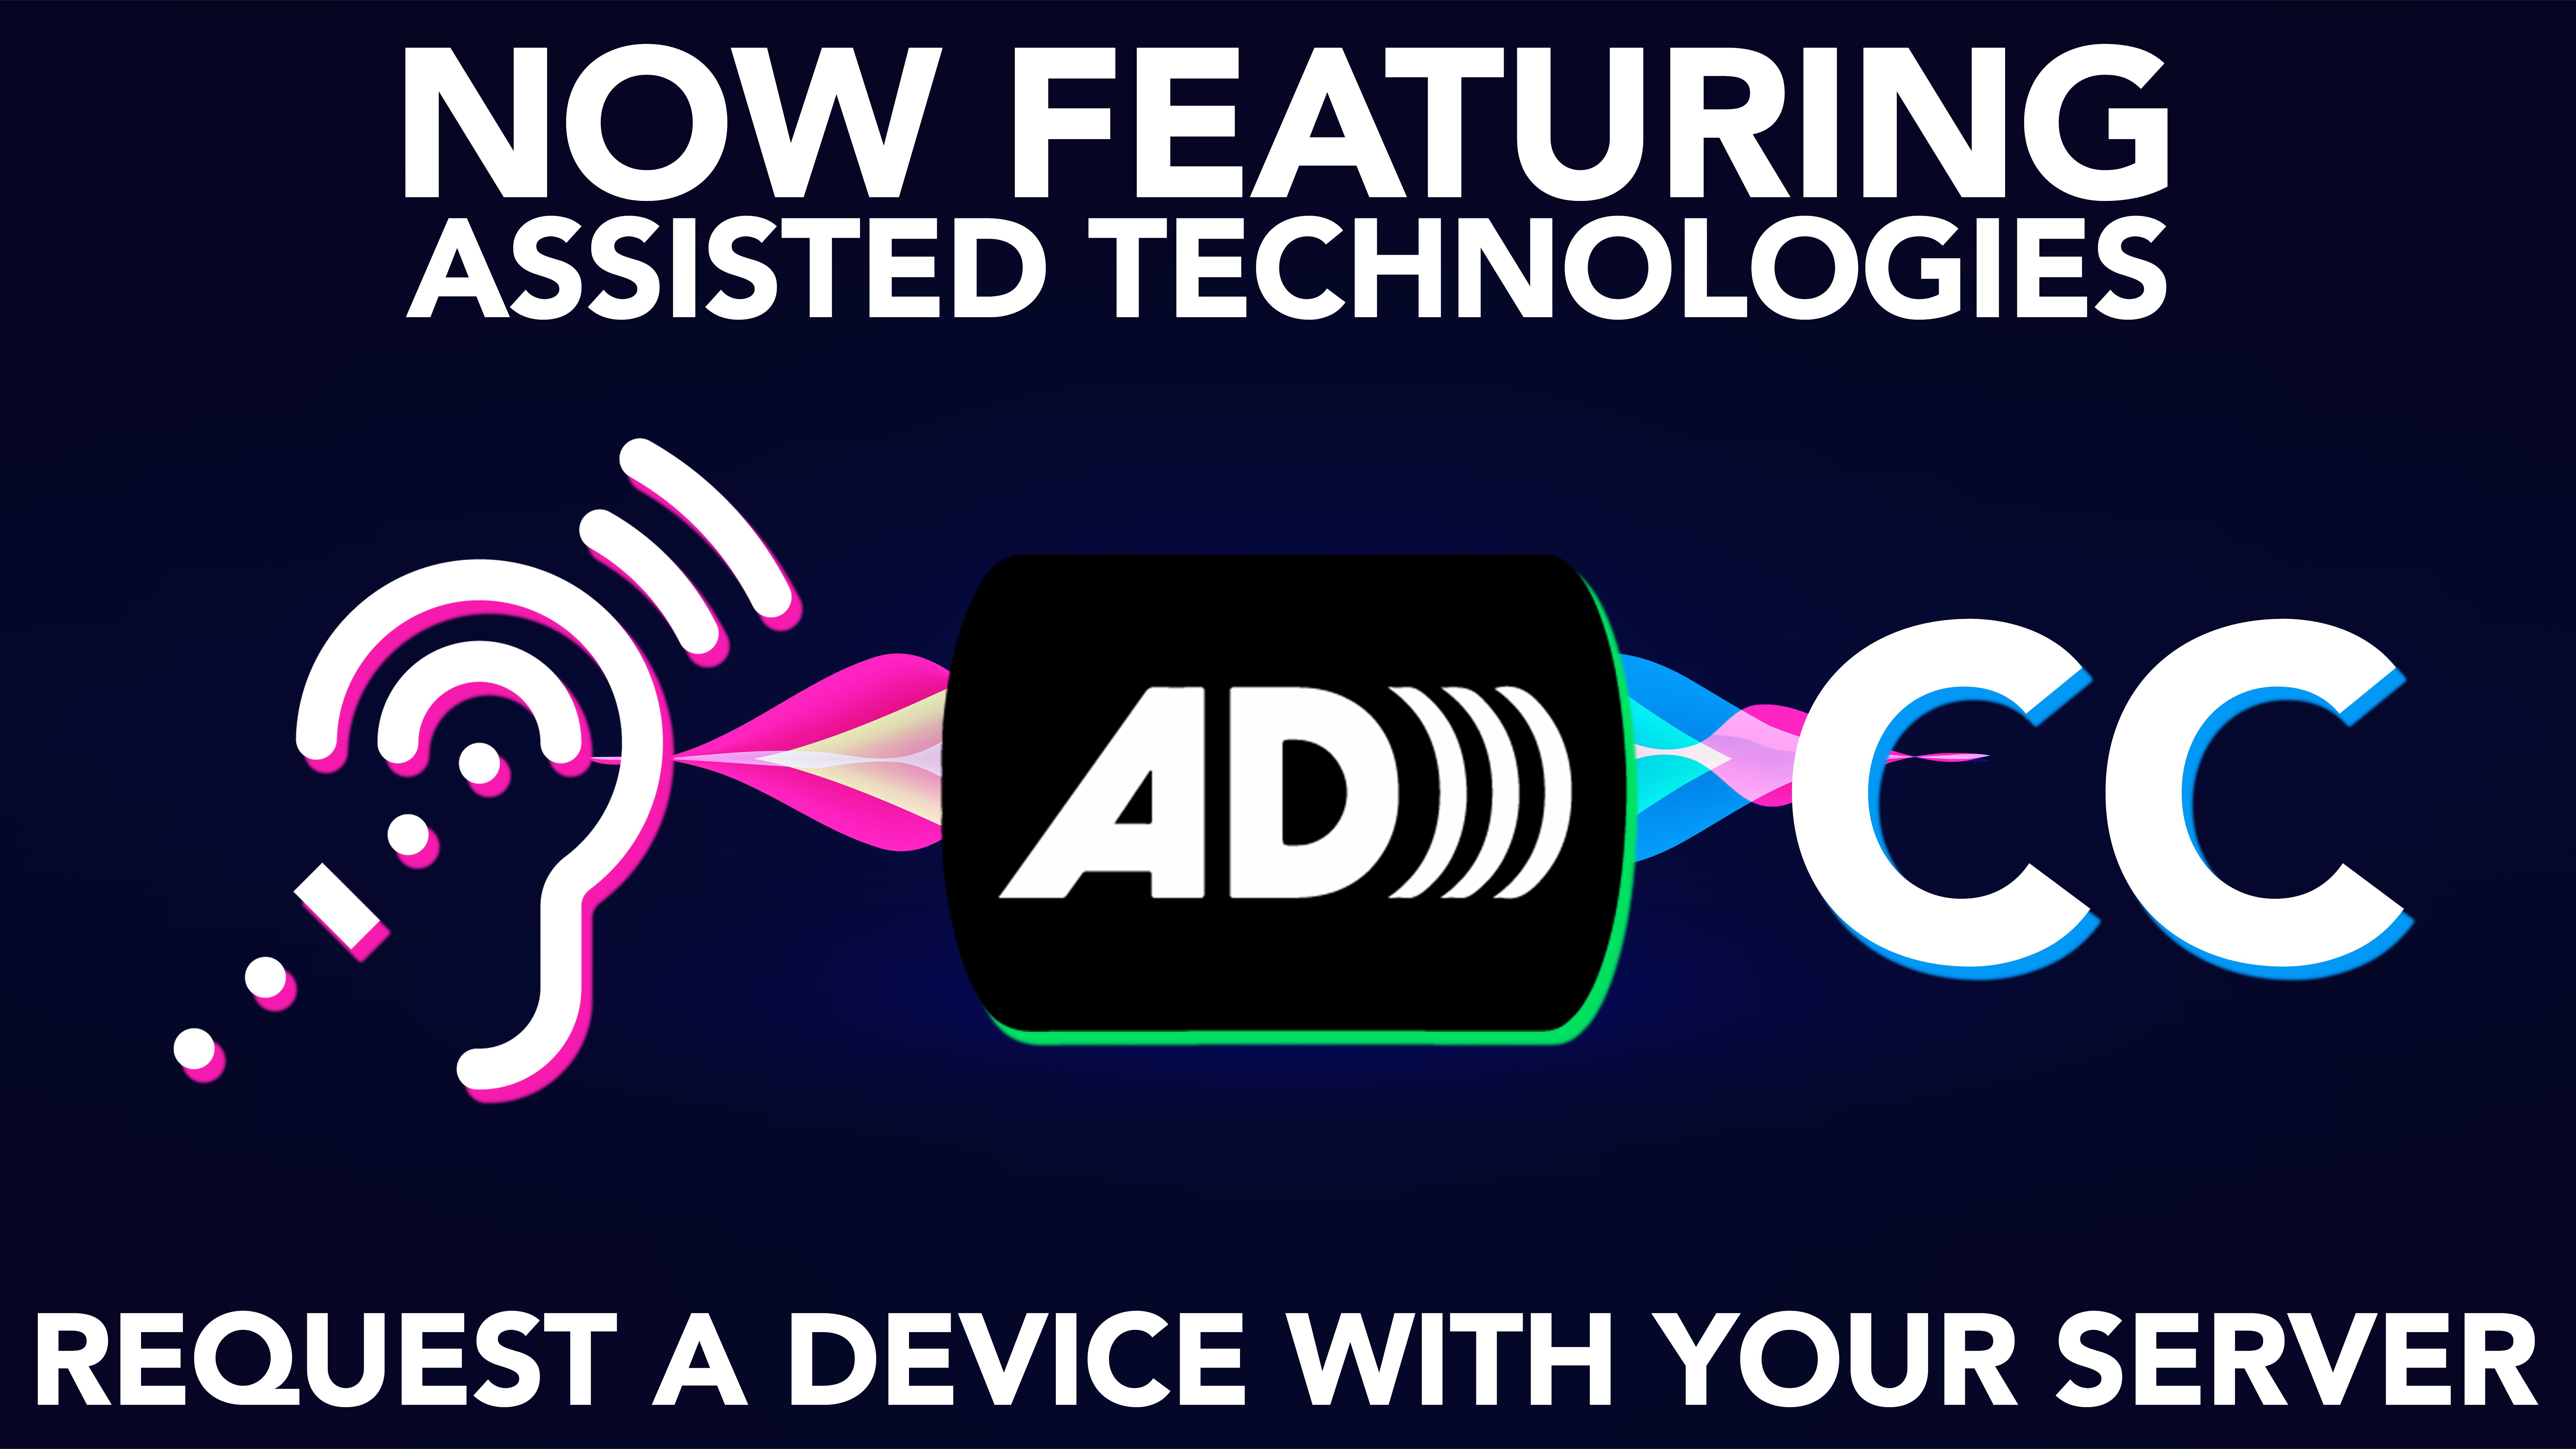 Now featuring assisted technologies. Request a device with your server.